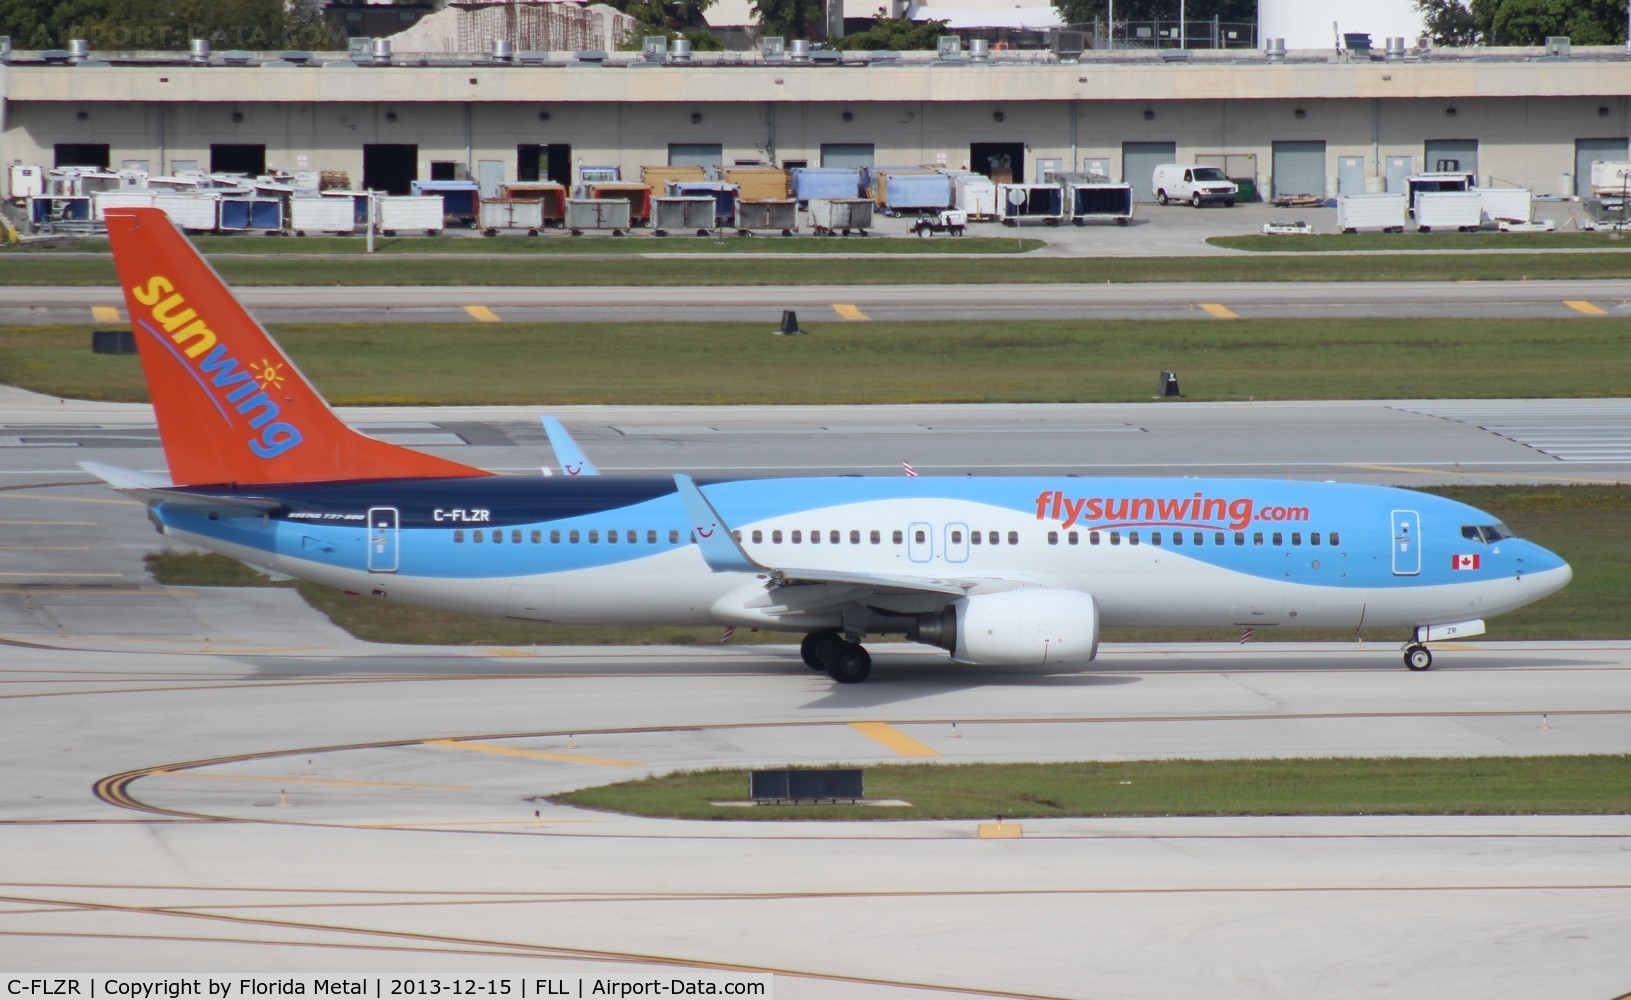 C-FLZR, 2009 Boeing 737-8K5 C/N 35145, Sun Wing hybrid with Thompson colors 737-800